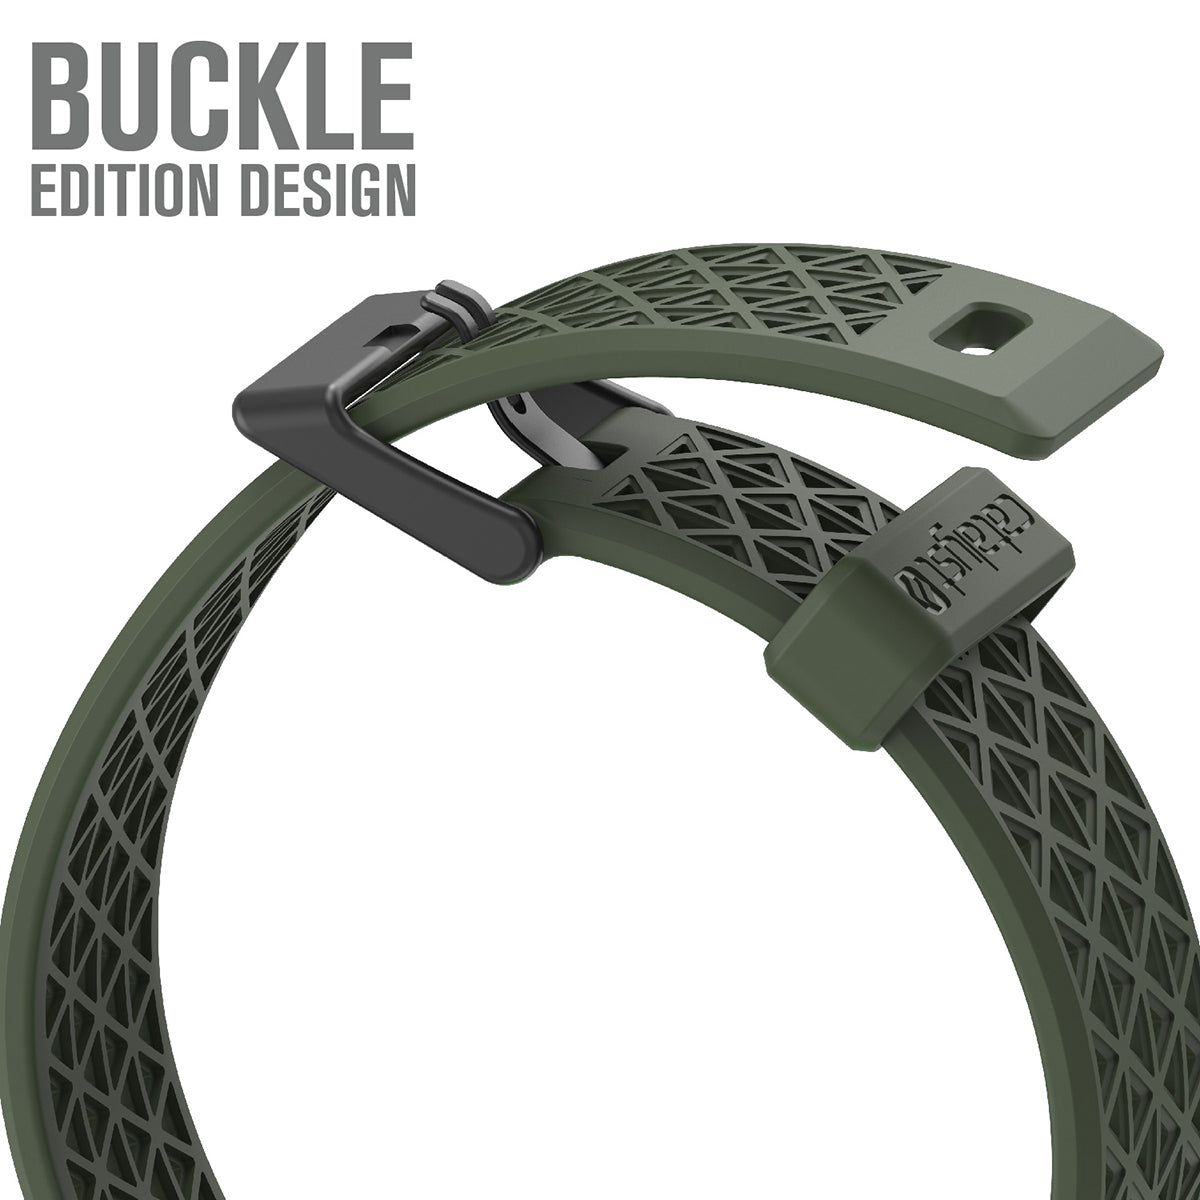 catalyst apple watch series 9 8 7 6 5 4 SE Gen 2 1 38 40 41mm sport band buckle edition showing the buckle edition design army green text reads buckle edition design